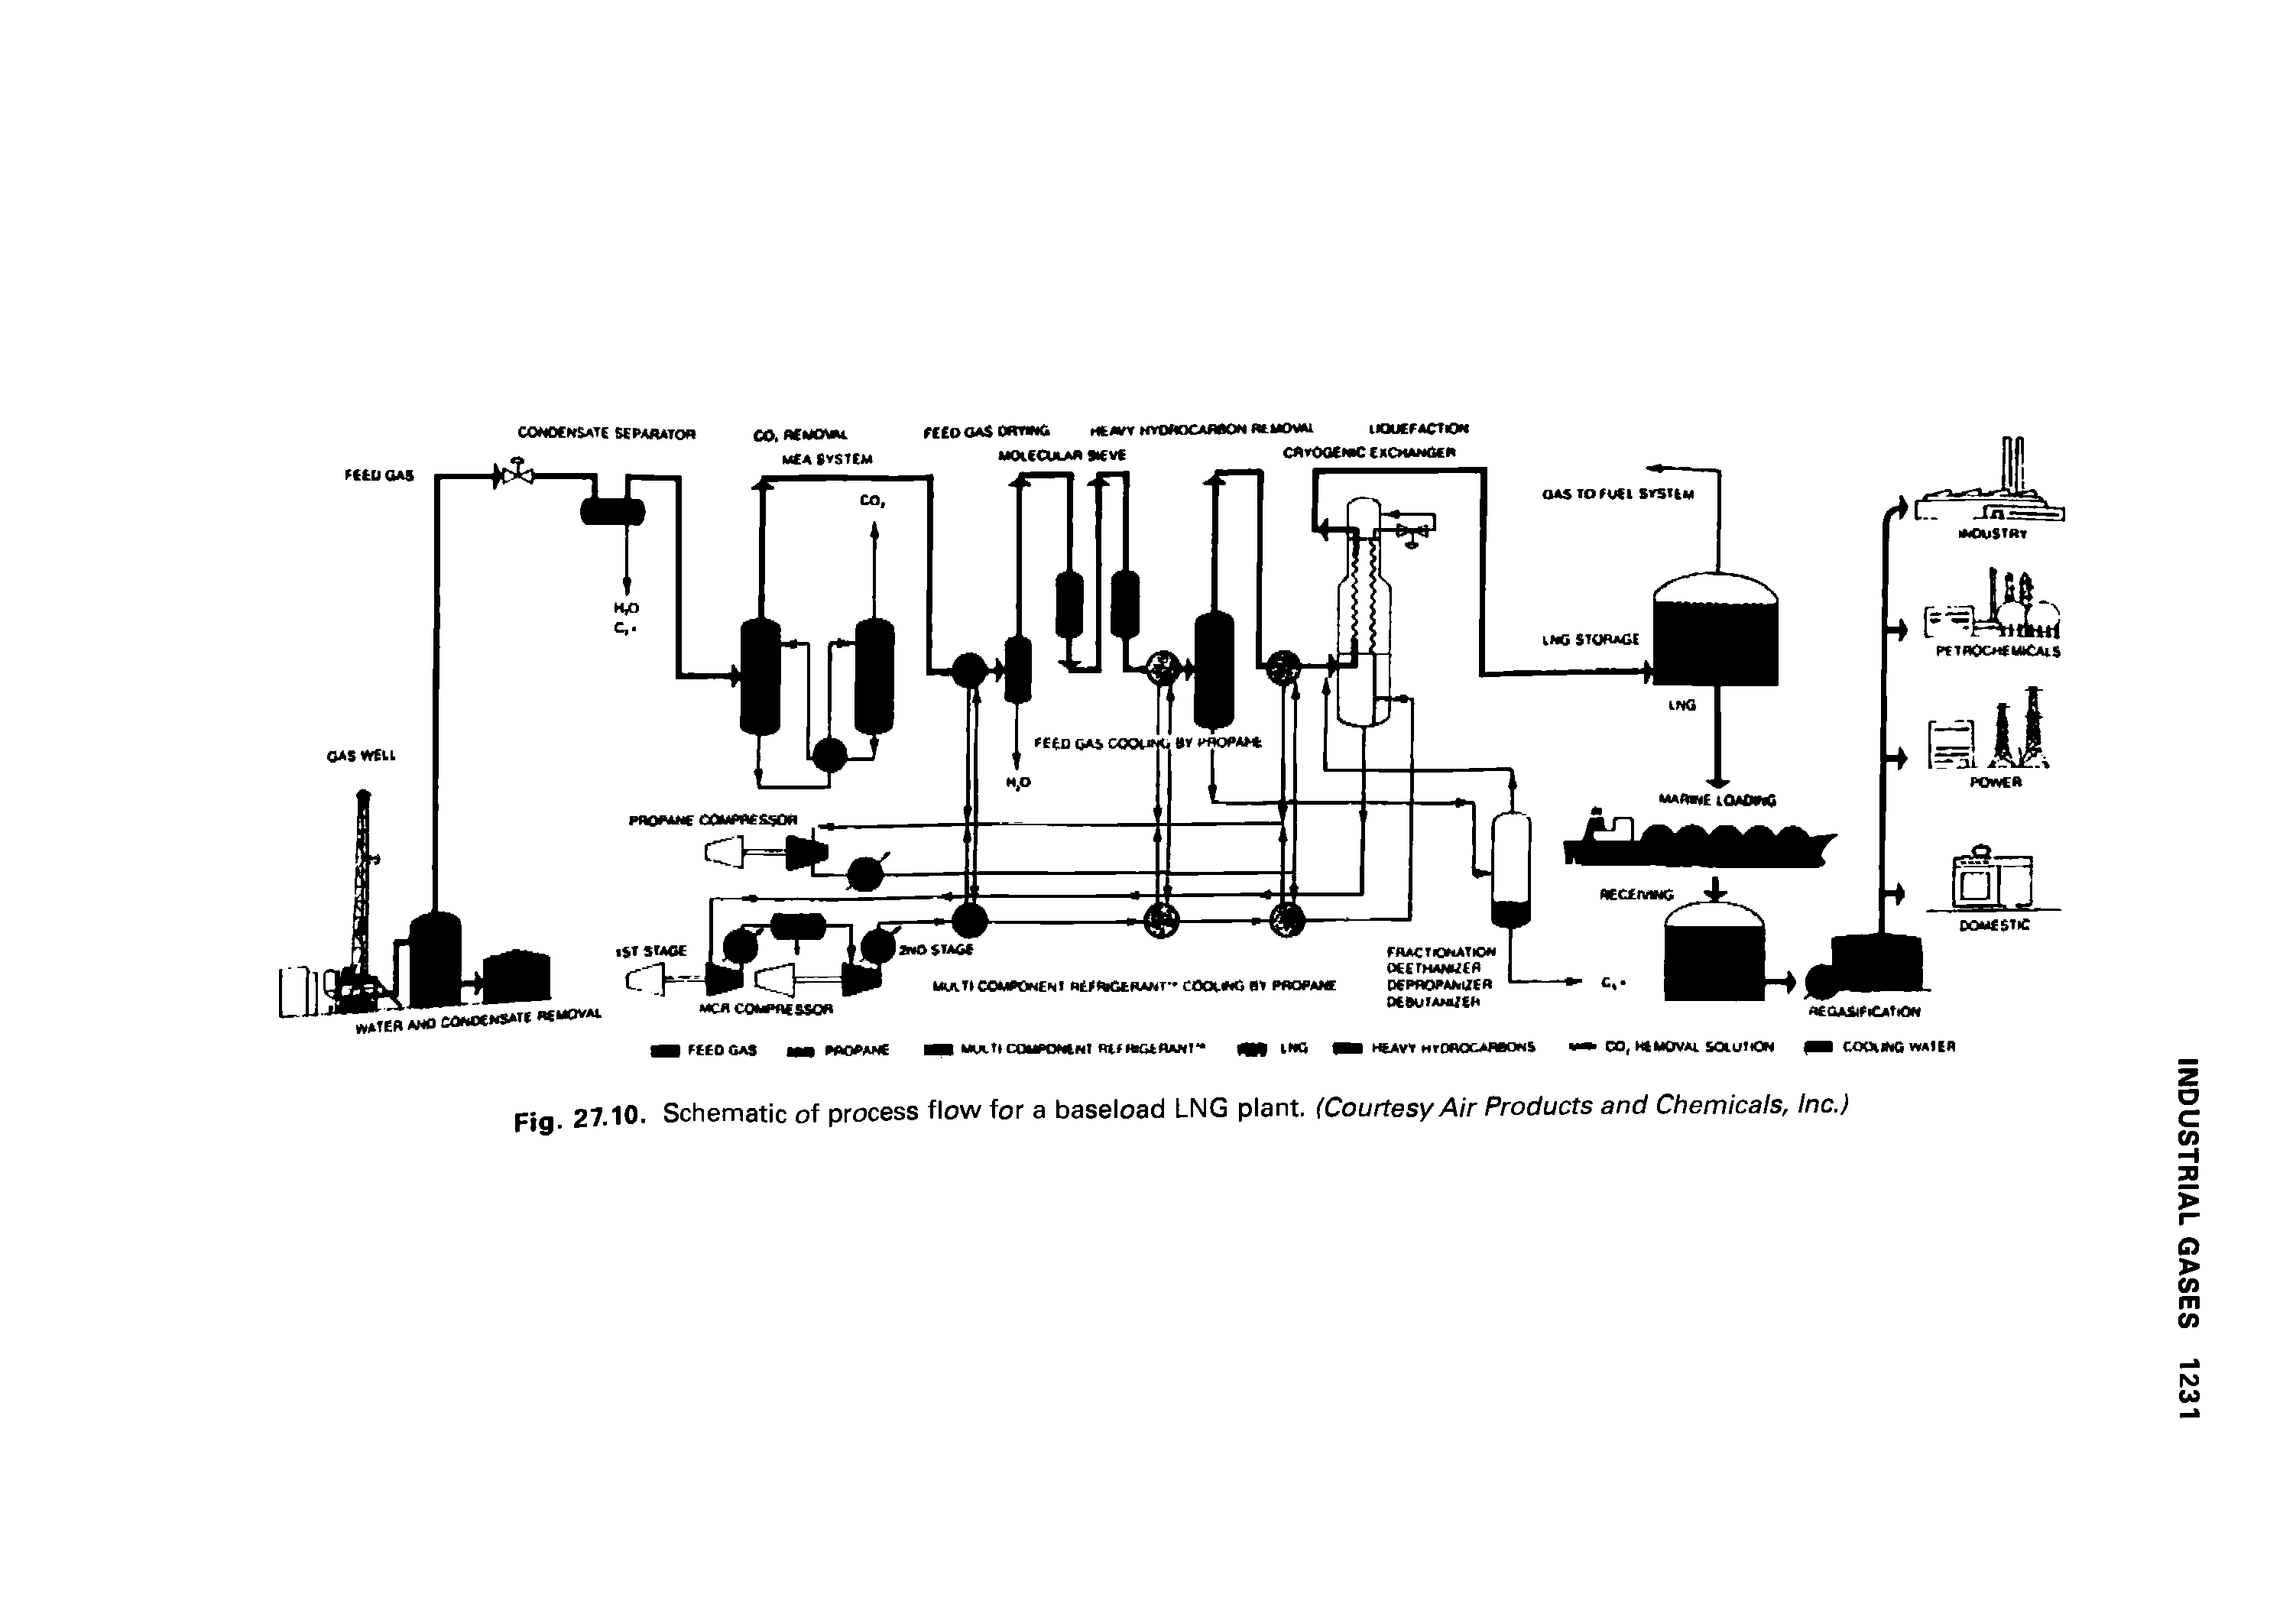 Fig. 27.10. Schematic of process flow for a baseload LNG plant. (Courtesy Air Products and Chemicals, Inc.)...